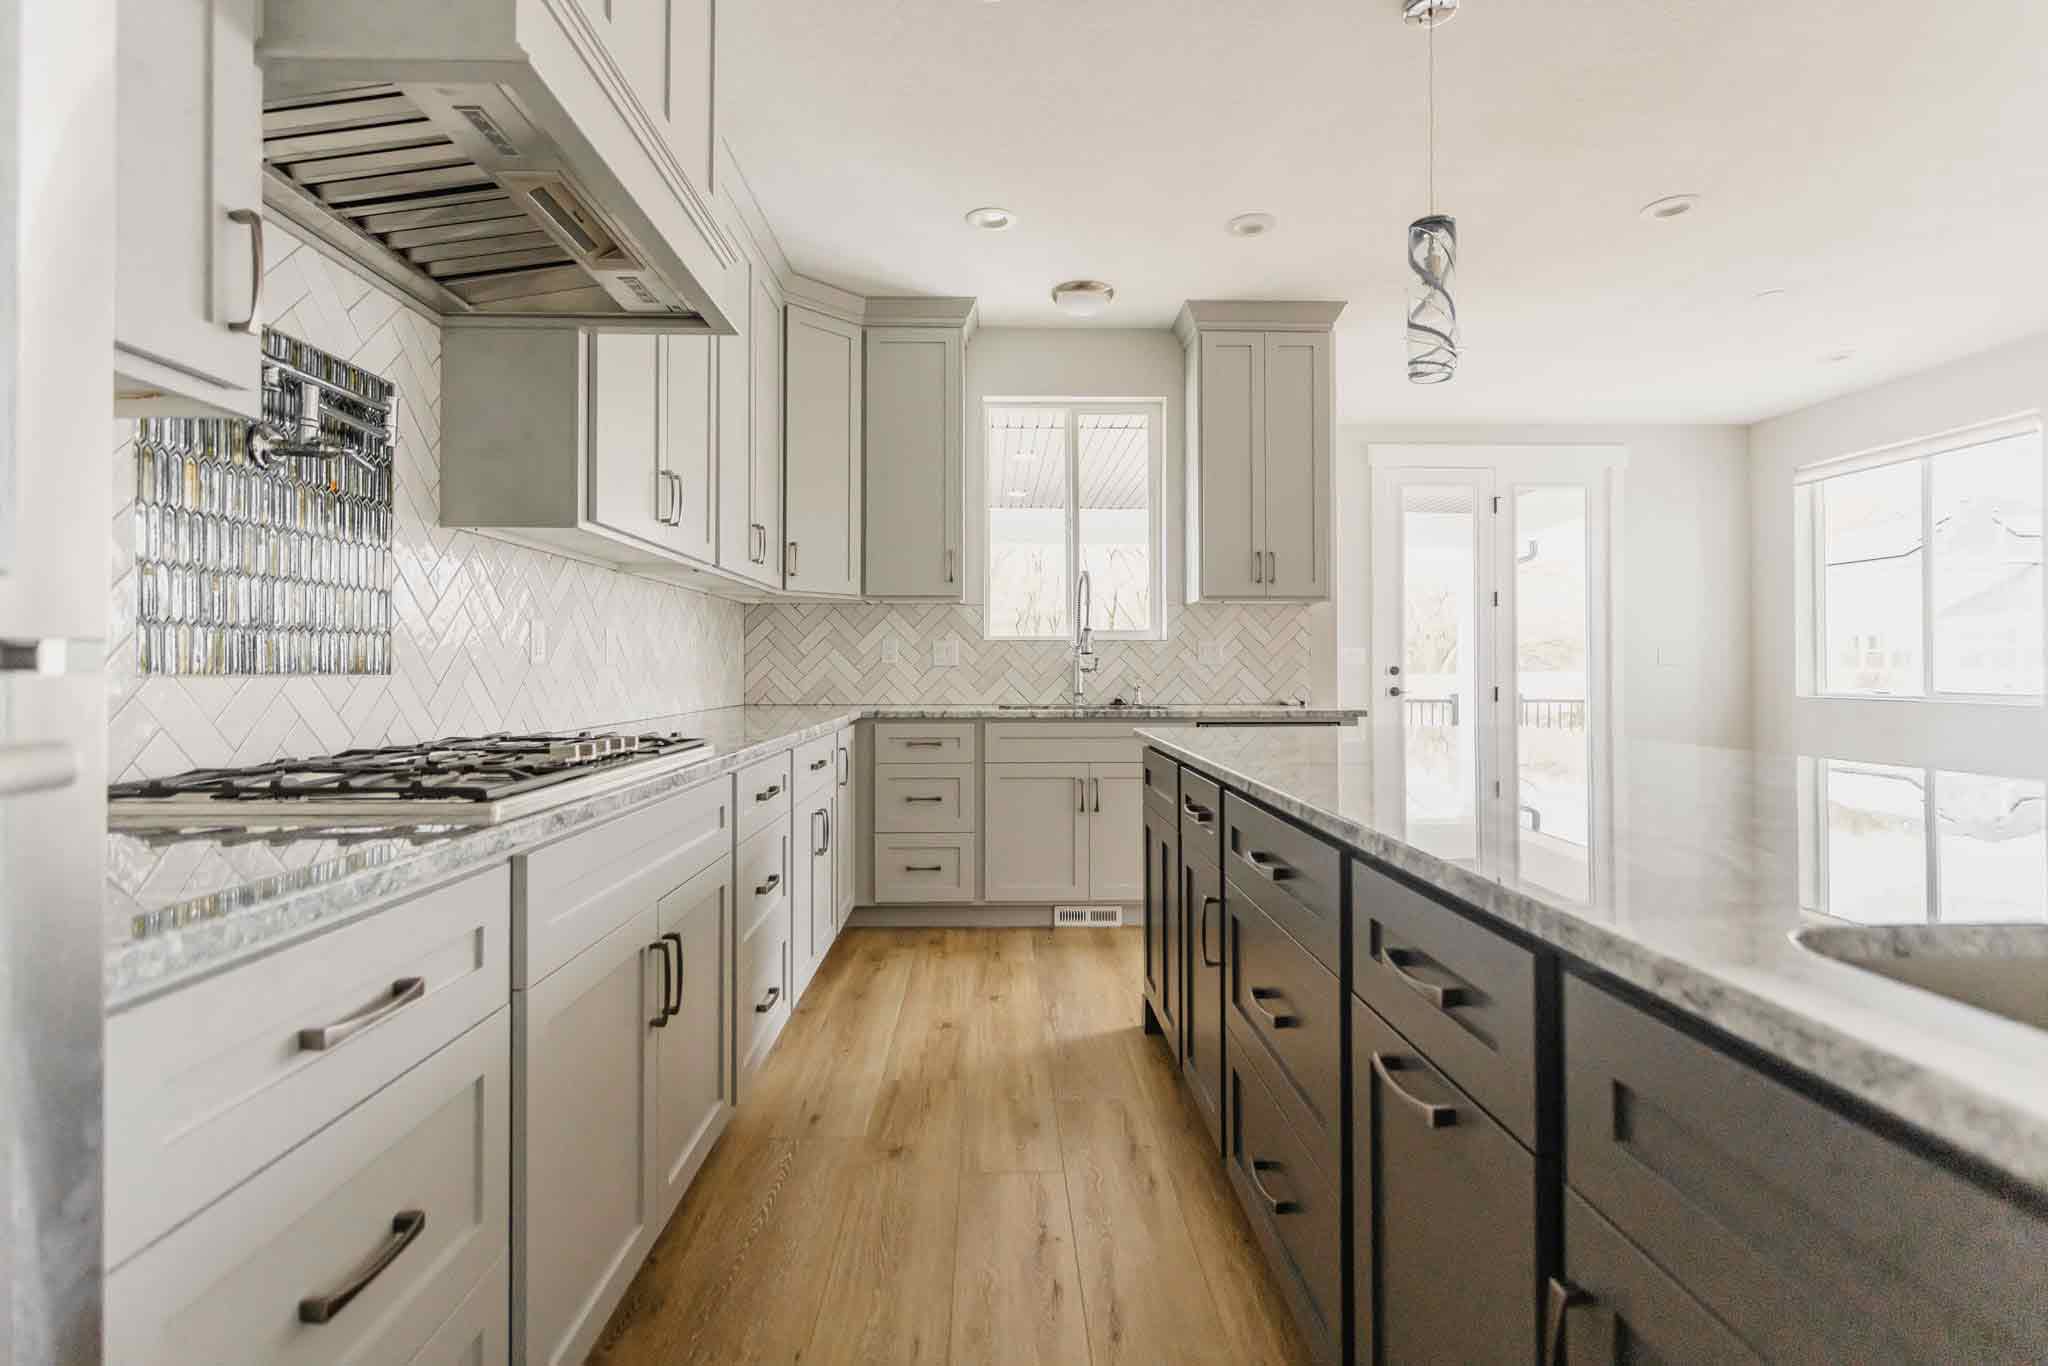 kitchen with cream & gray cabinets with light flooring by 10x builders in utah county